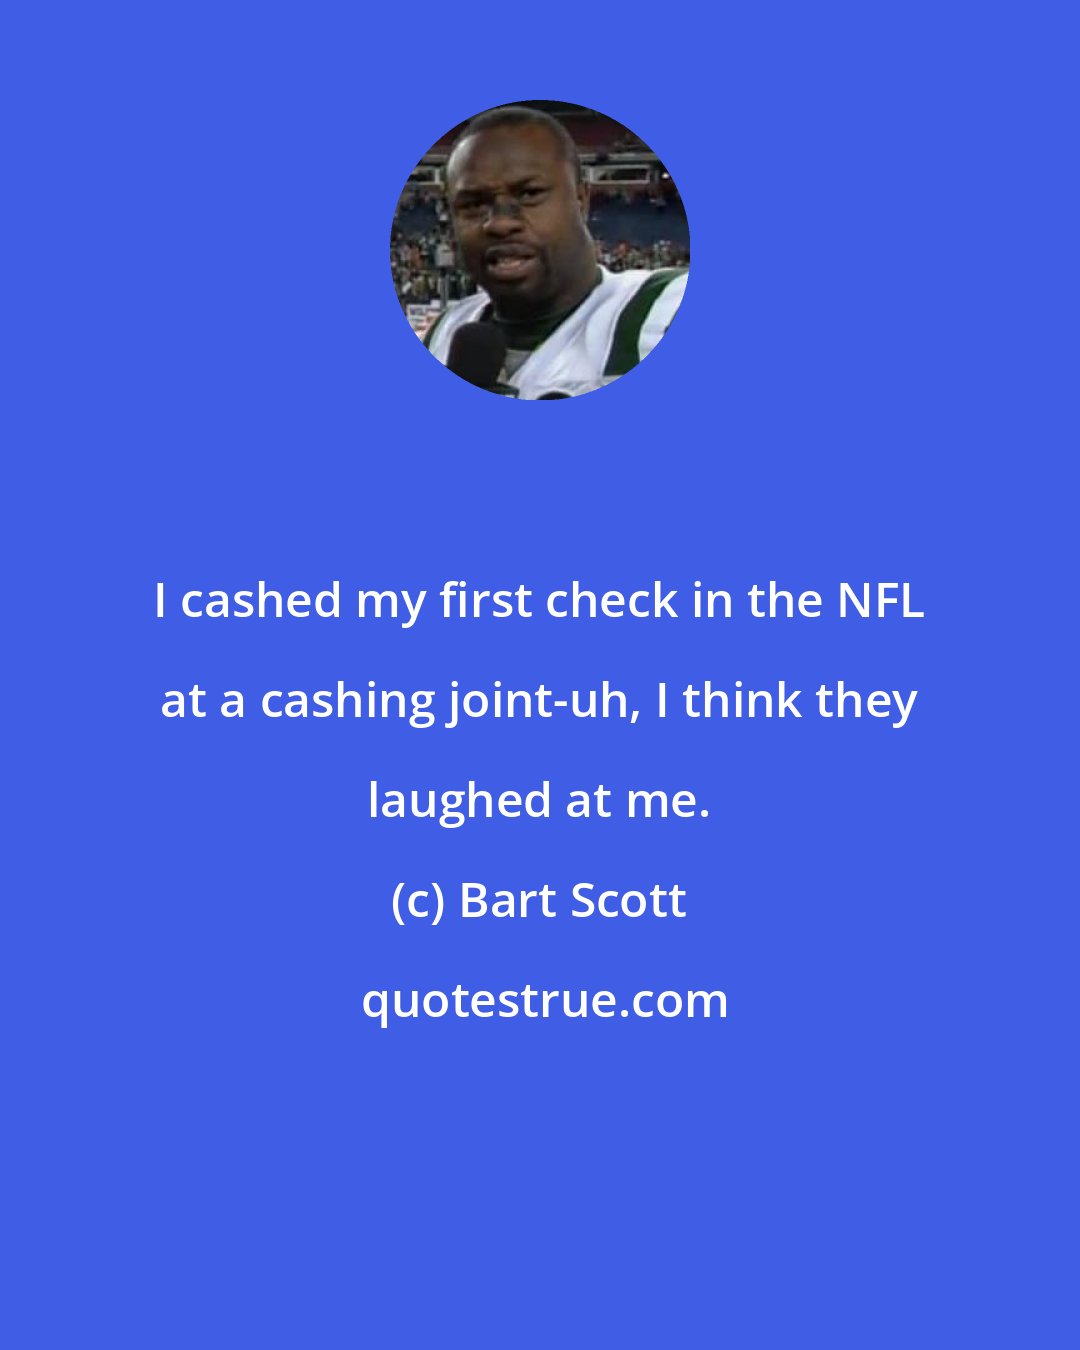 Bart Scott: I cashed my first check in the NFL at a cashing joint-uh, I think they laughed at me.